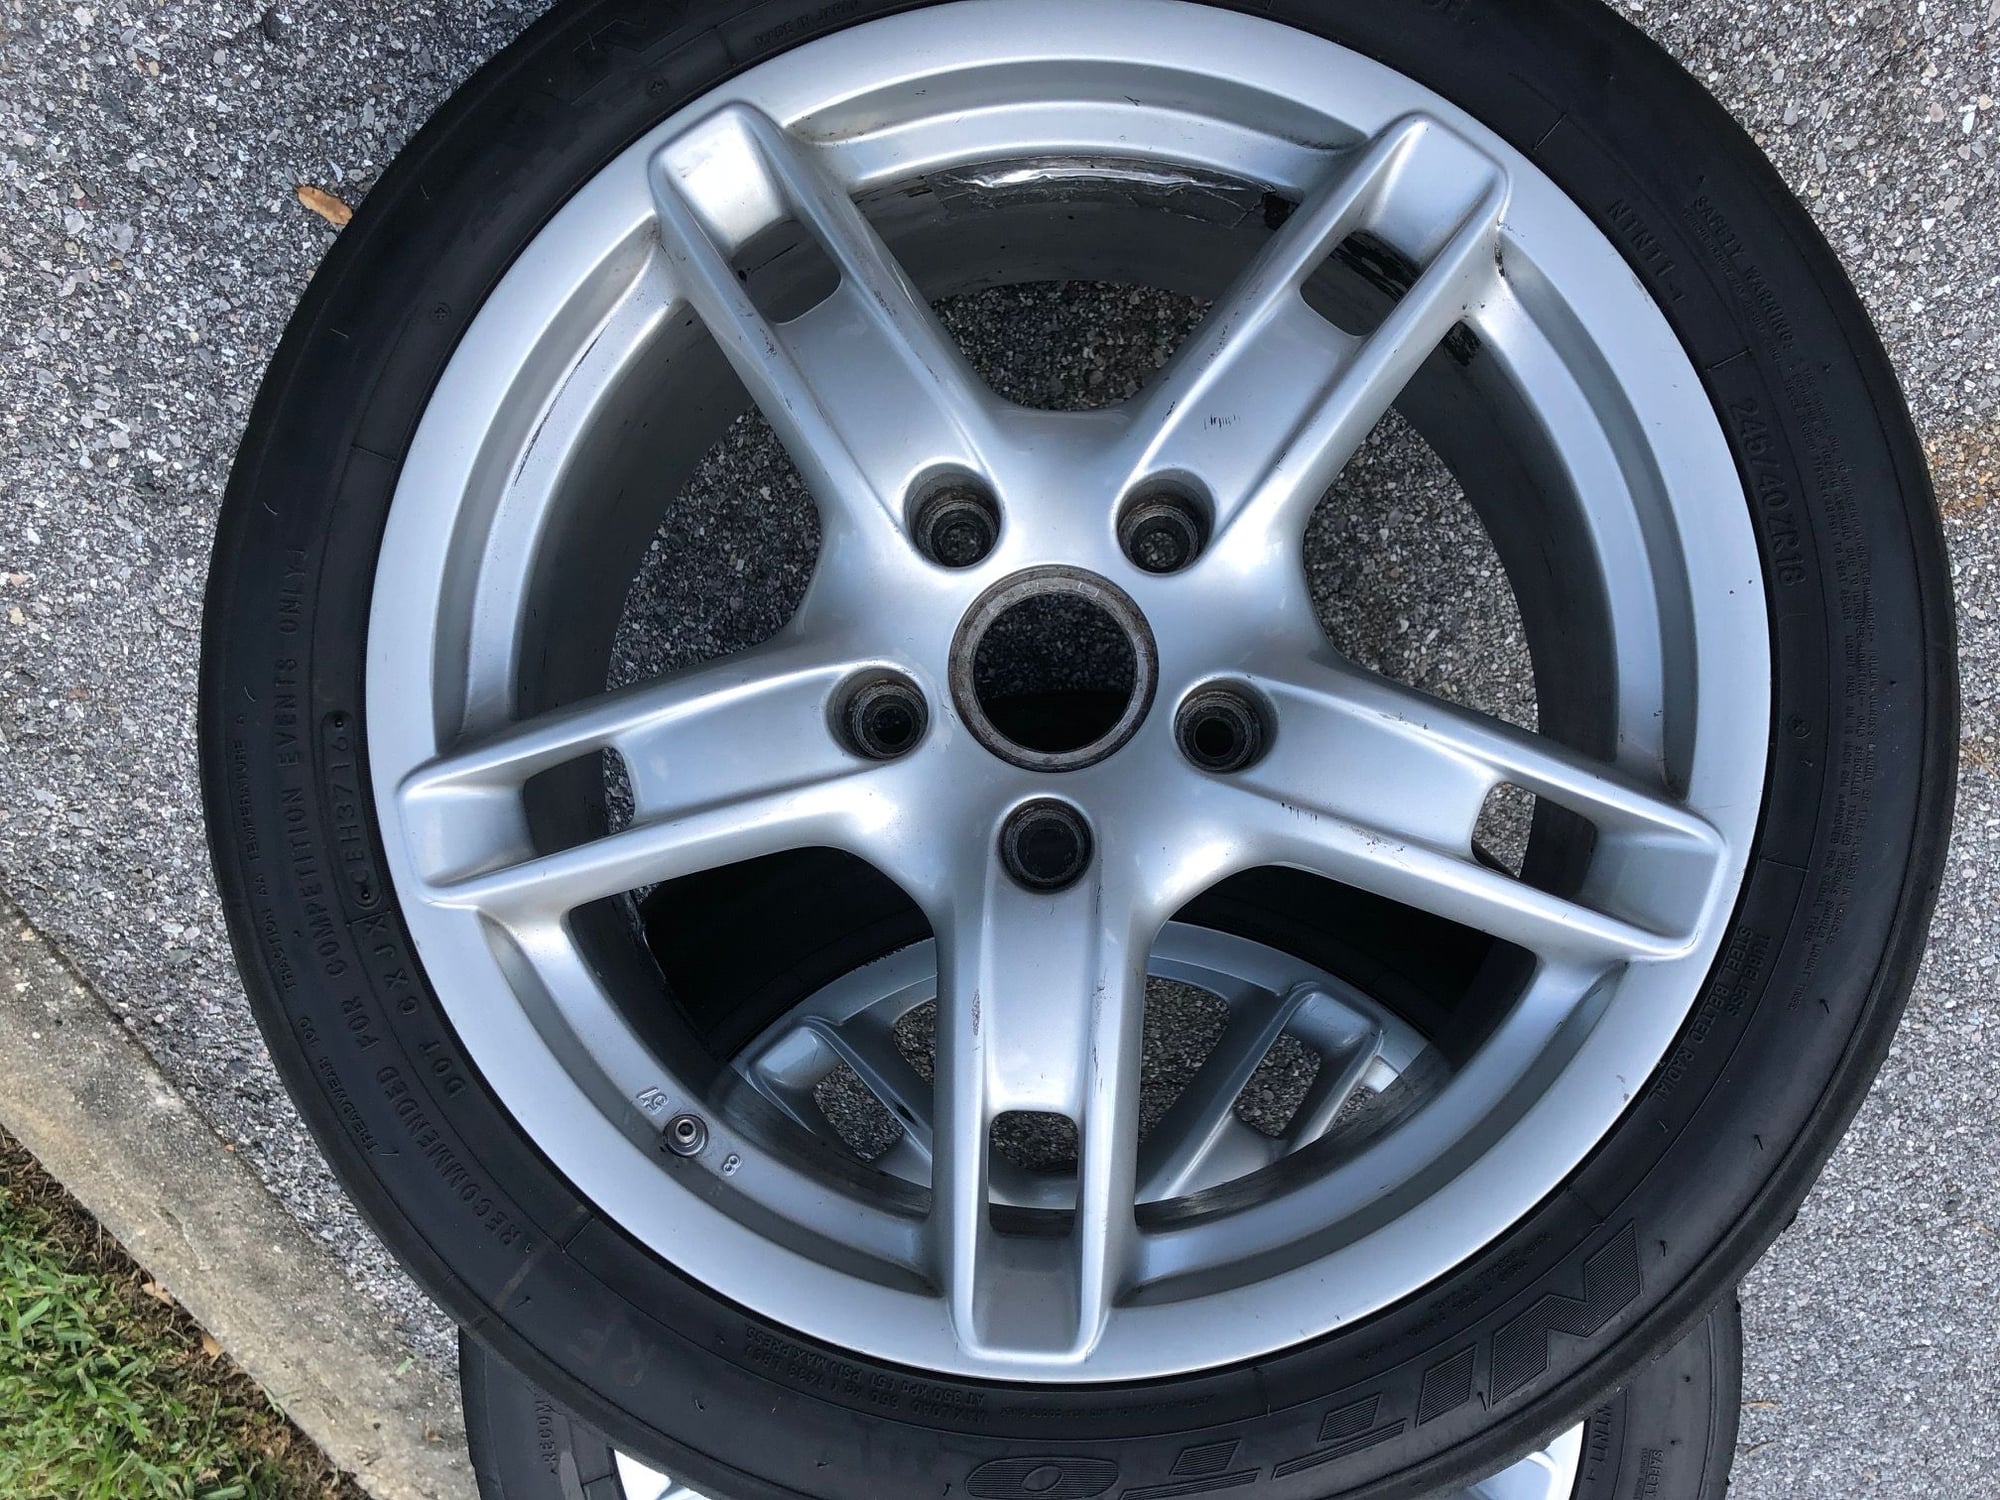 Wheels and Tires/Axles - FS: OEM Cayman S Wheels w/ Nitto NT01 Tires - Used - 2006 to 2008 Porsche Cayman - Venice, FL 34285, United States